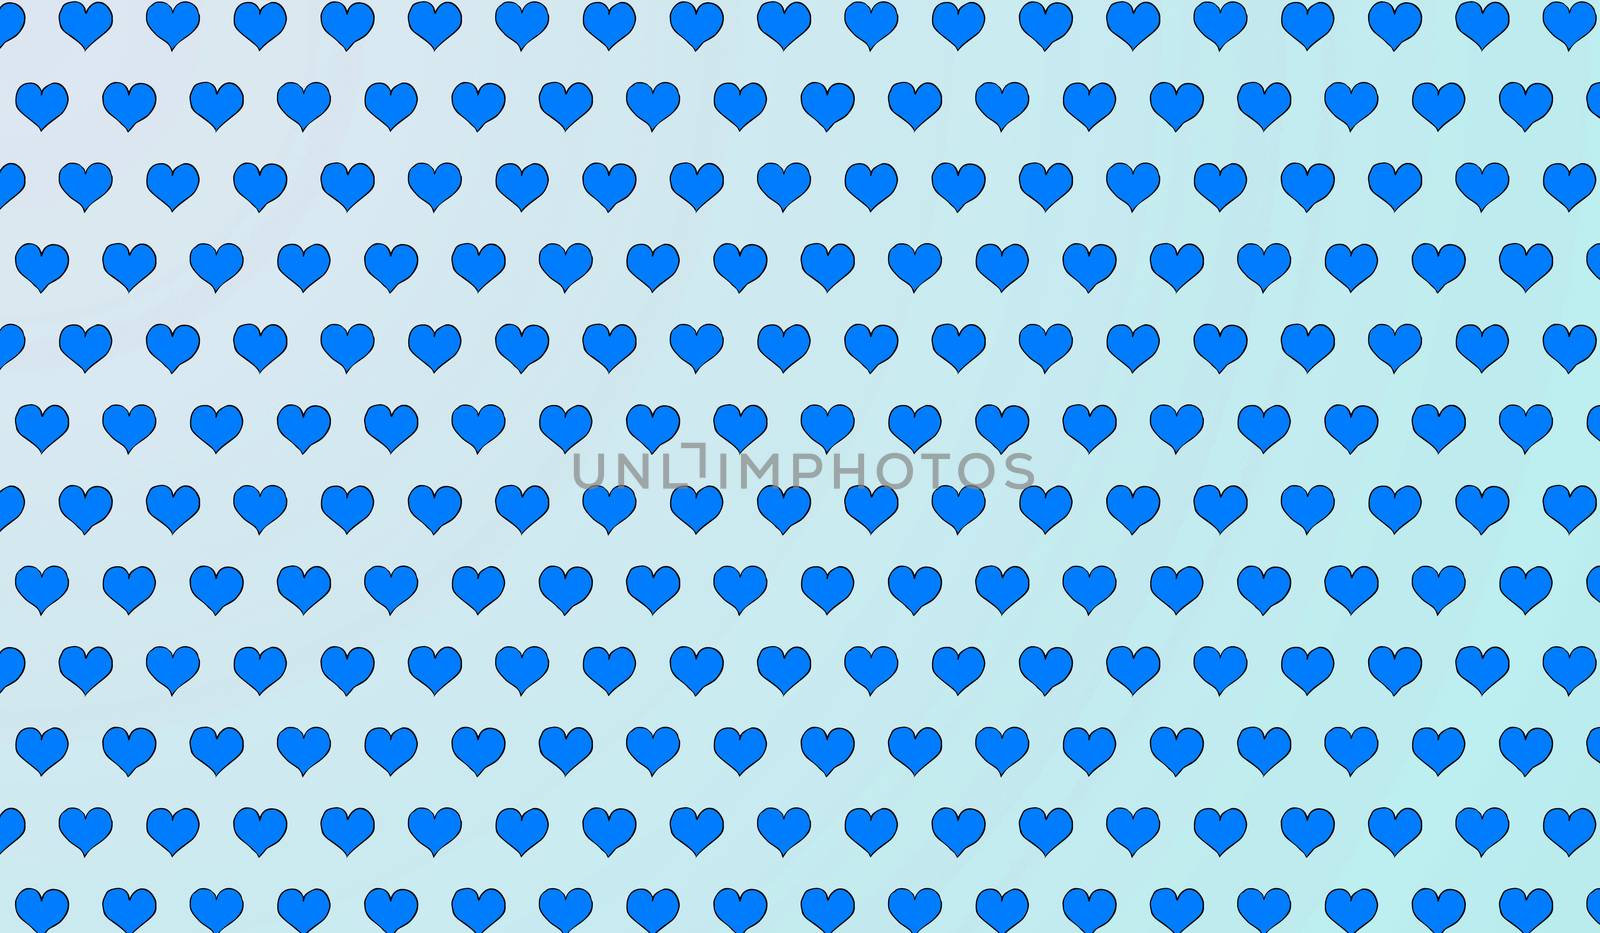 2d blue pattern of cartoon hearts on isolated background by Andreajk3